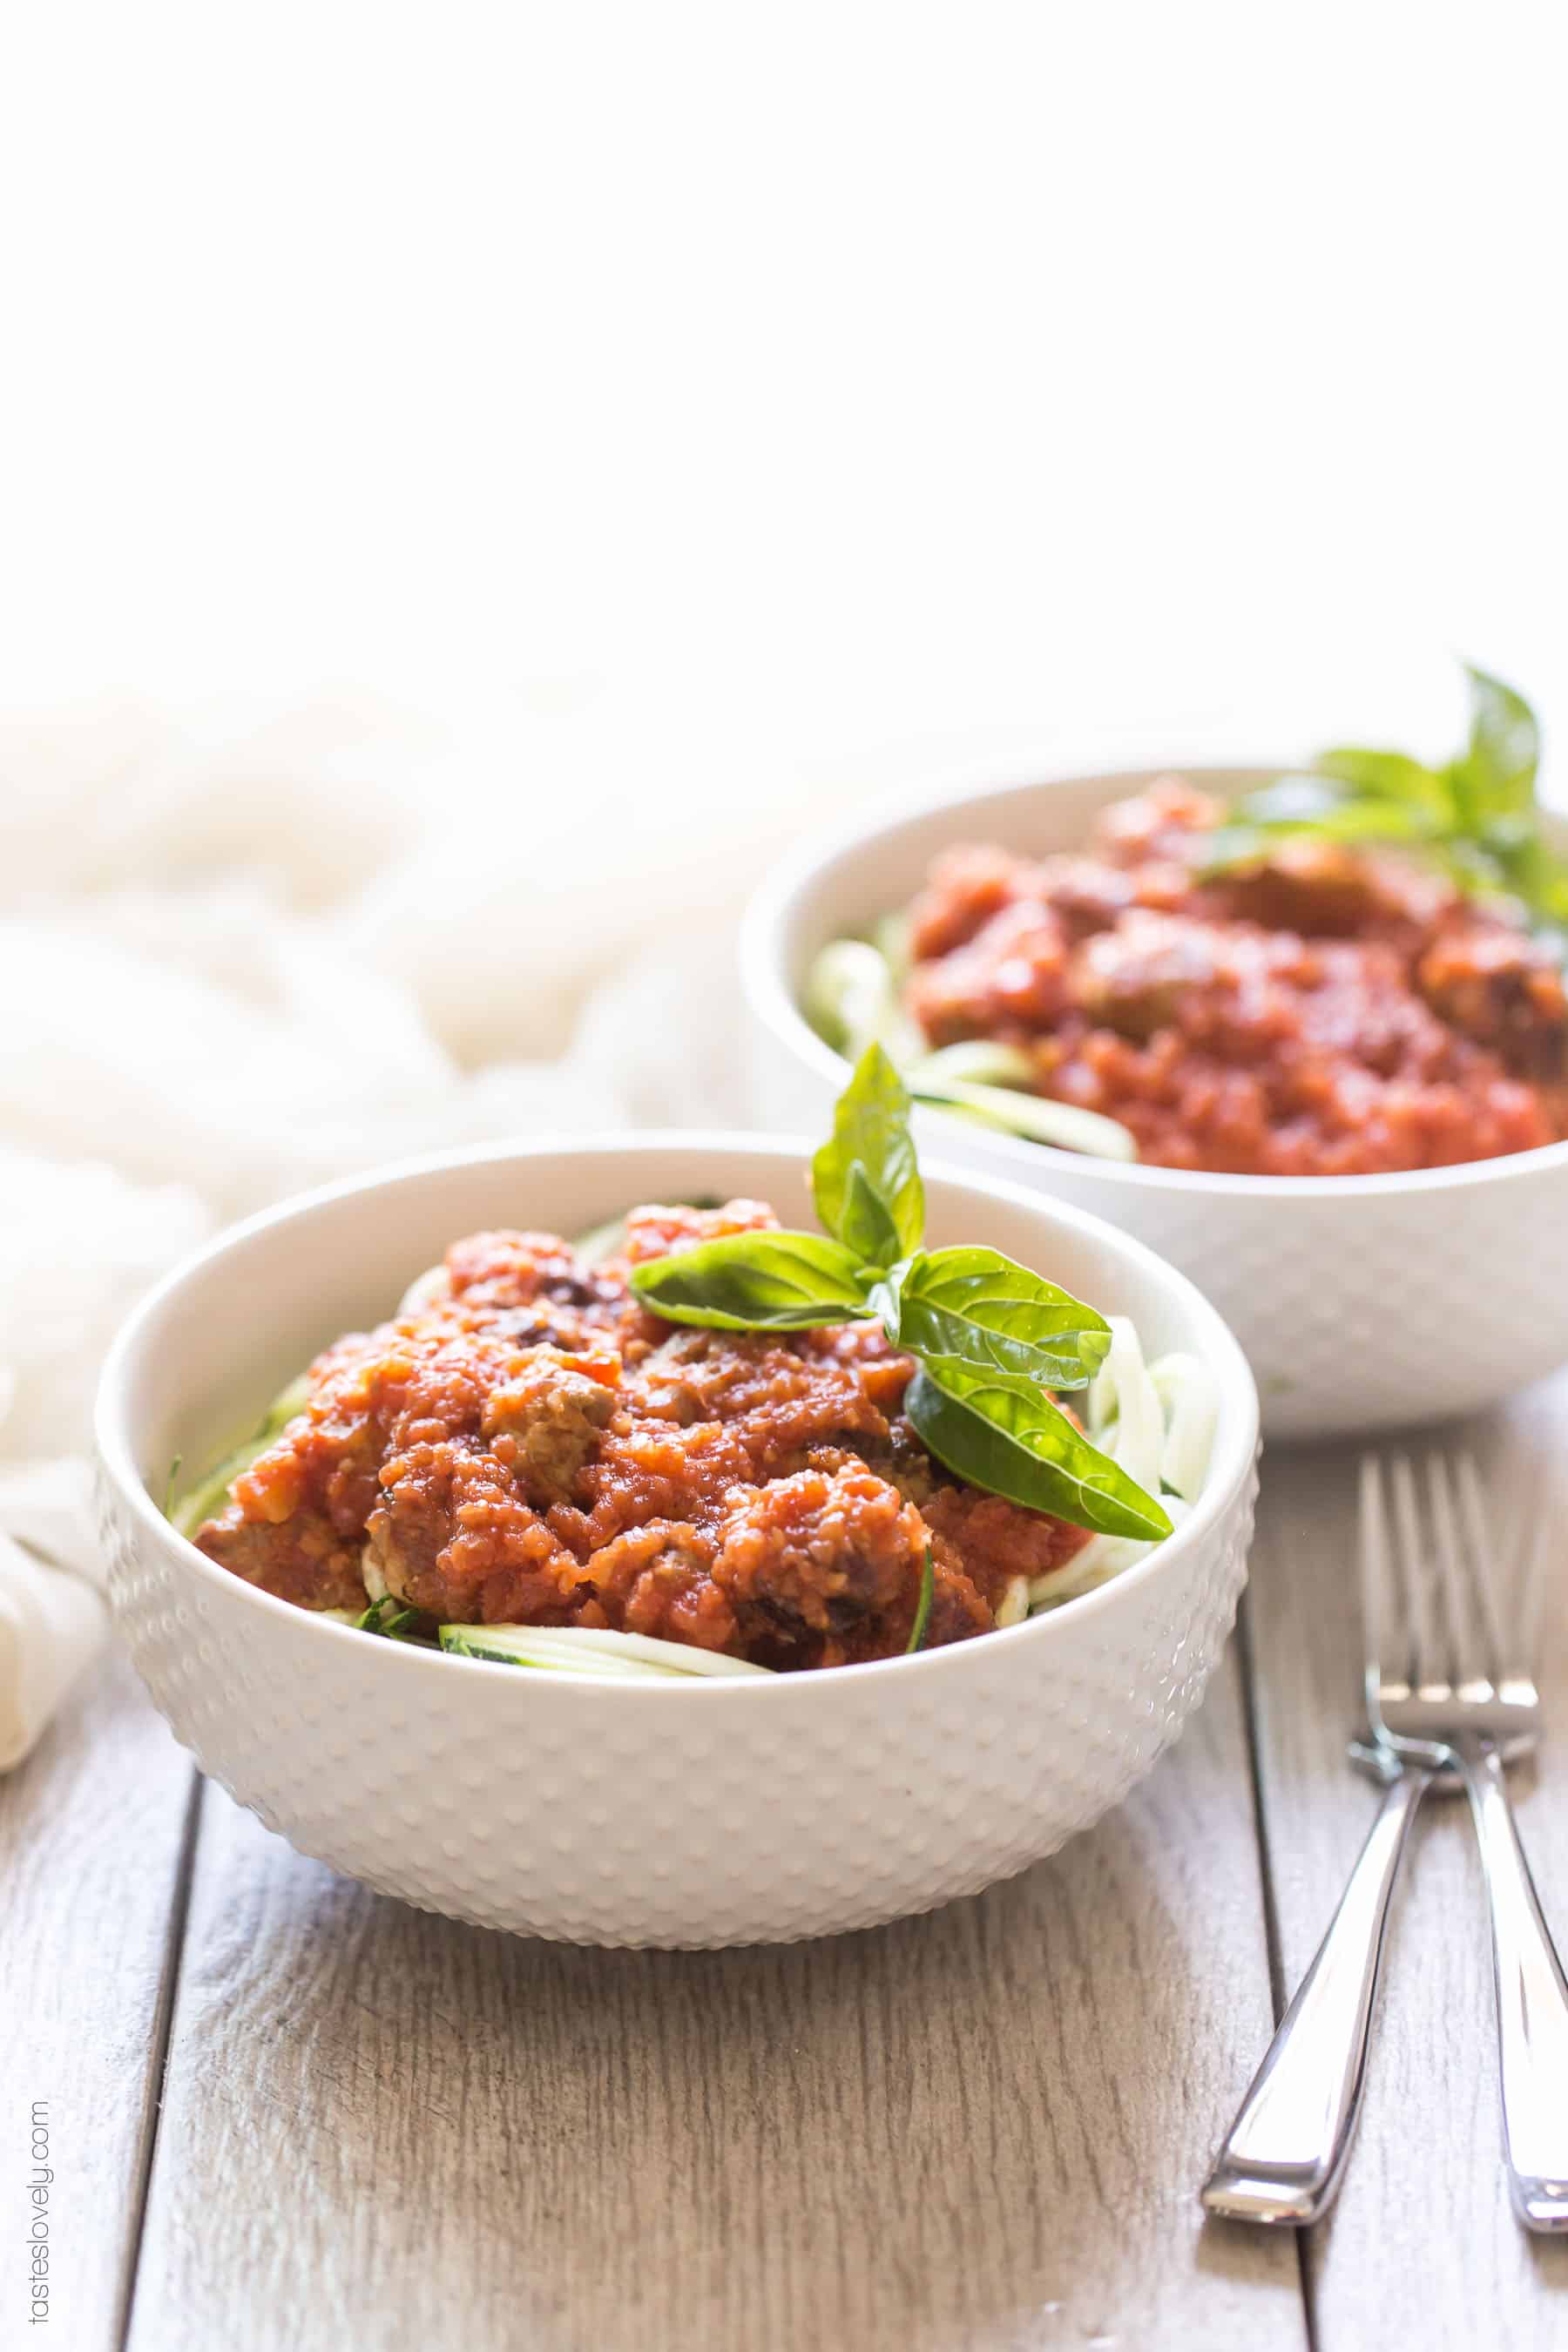 Homemade paleo & Whole30 marinara sauce, made from canned tomatoes with italian sausage. Served over zucchini noodles. A healthy and delicious dinner recipe! Paleo, whole30, gluten free, grain free, dairy free, sugar free, clean eating.